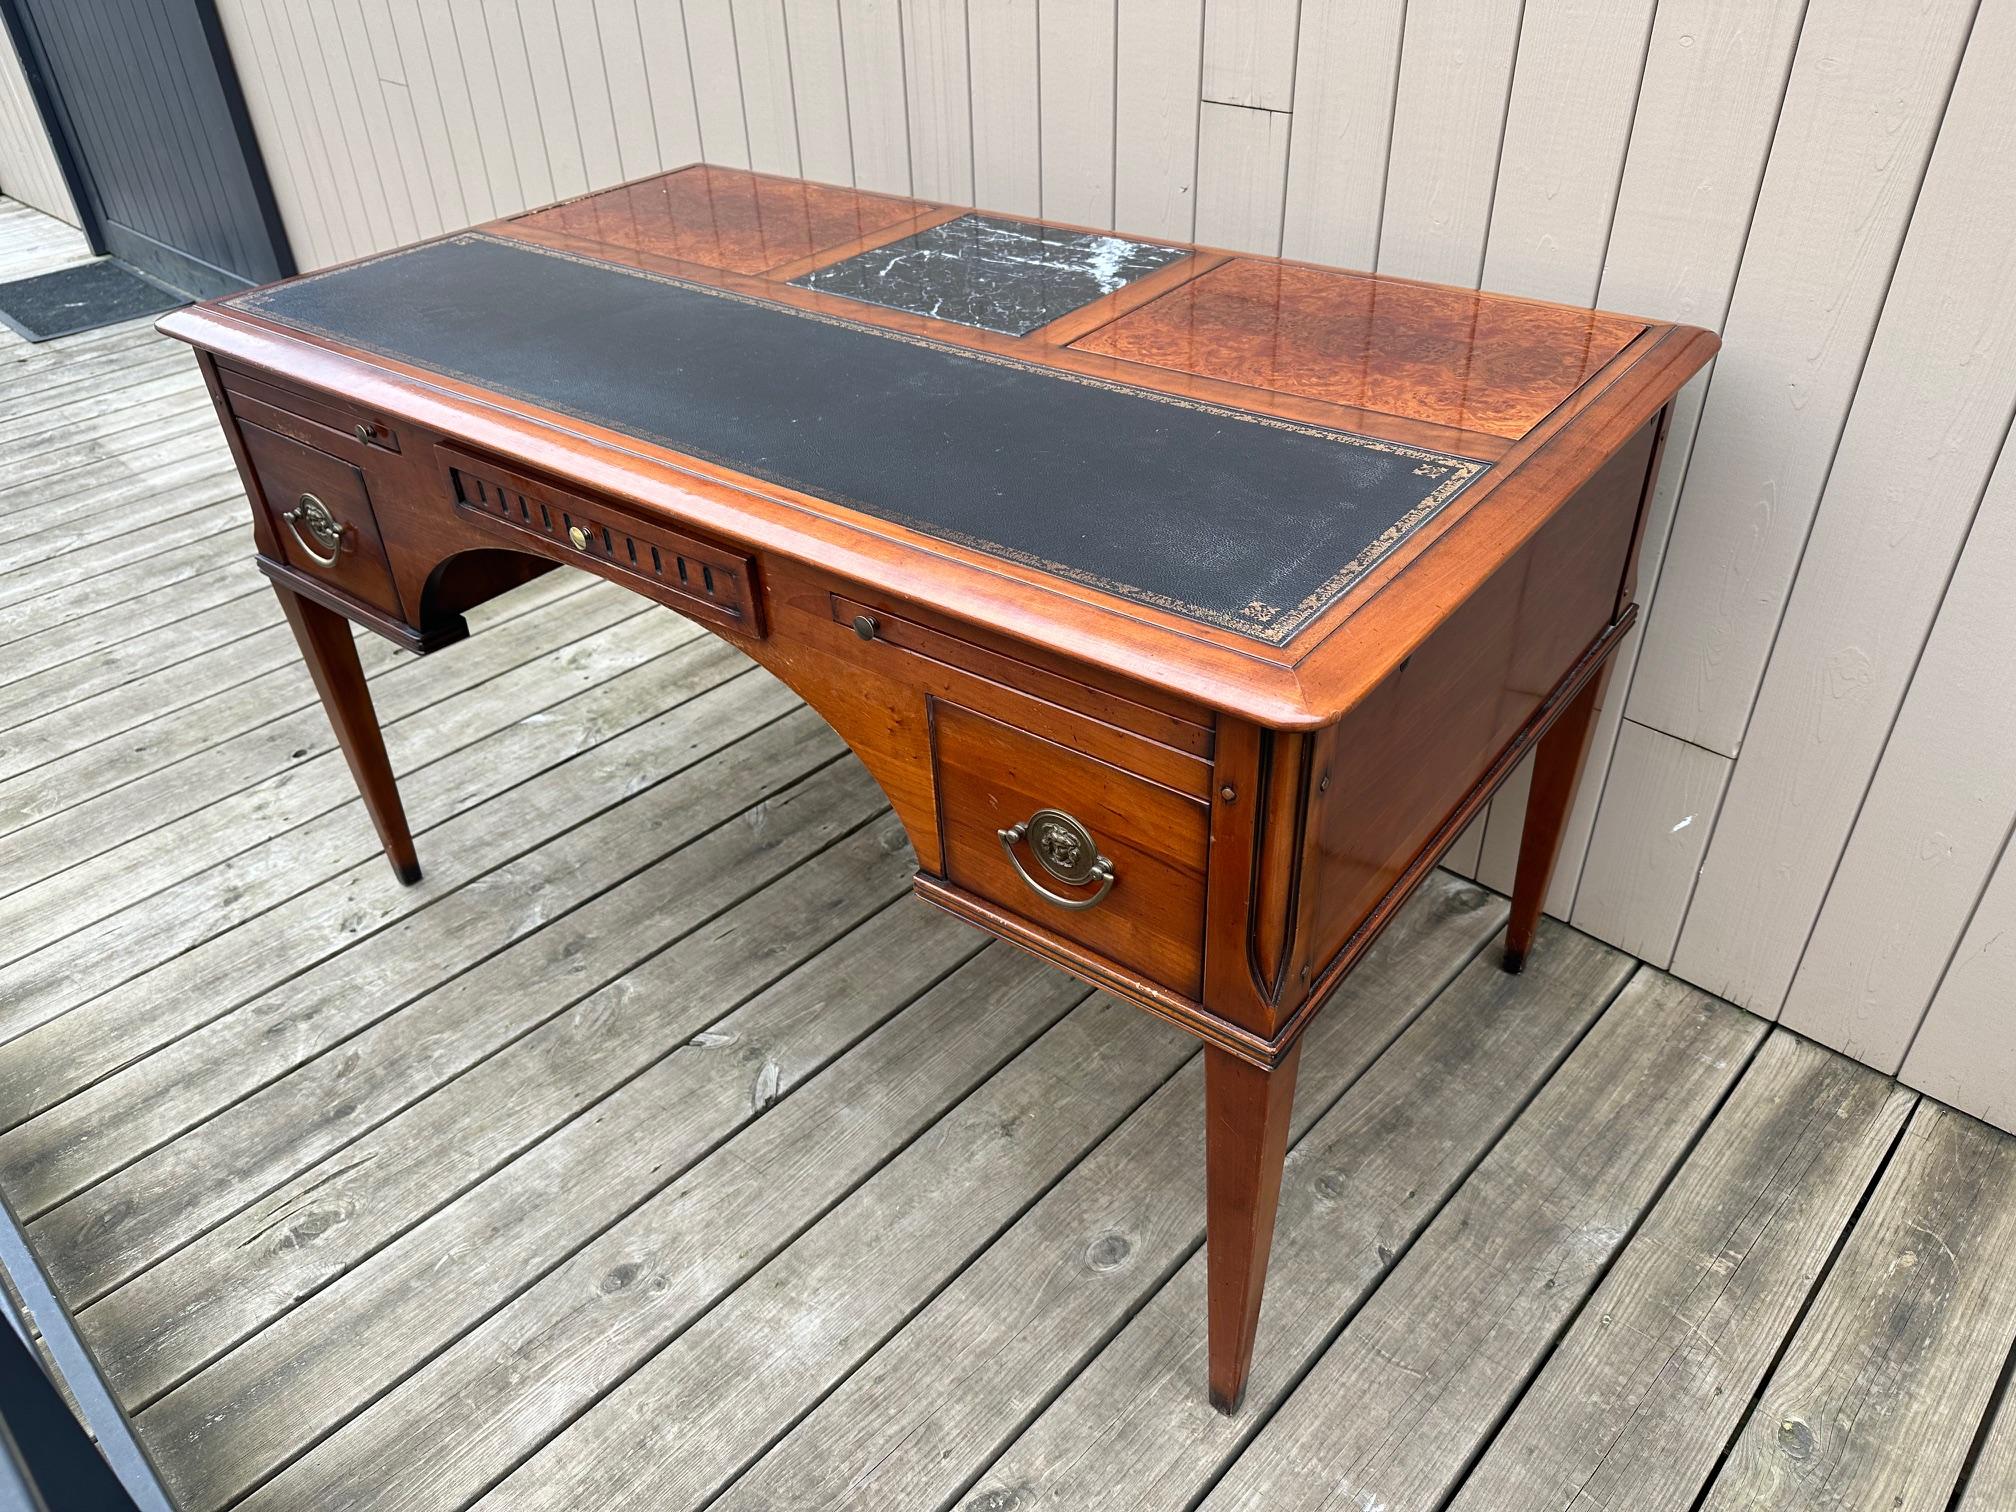 Very beautiful system desk from the 80s in cherry wood.
Leather top, one zipper on each side and two zippers at the front. 
Two easels that fold on either side of a marble top.
A central drawer as well as two drawers on the sides. Brass handles.